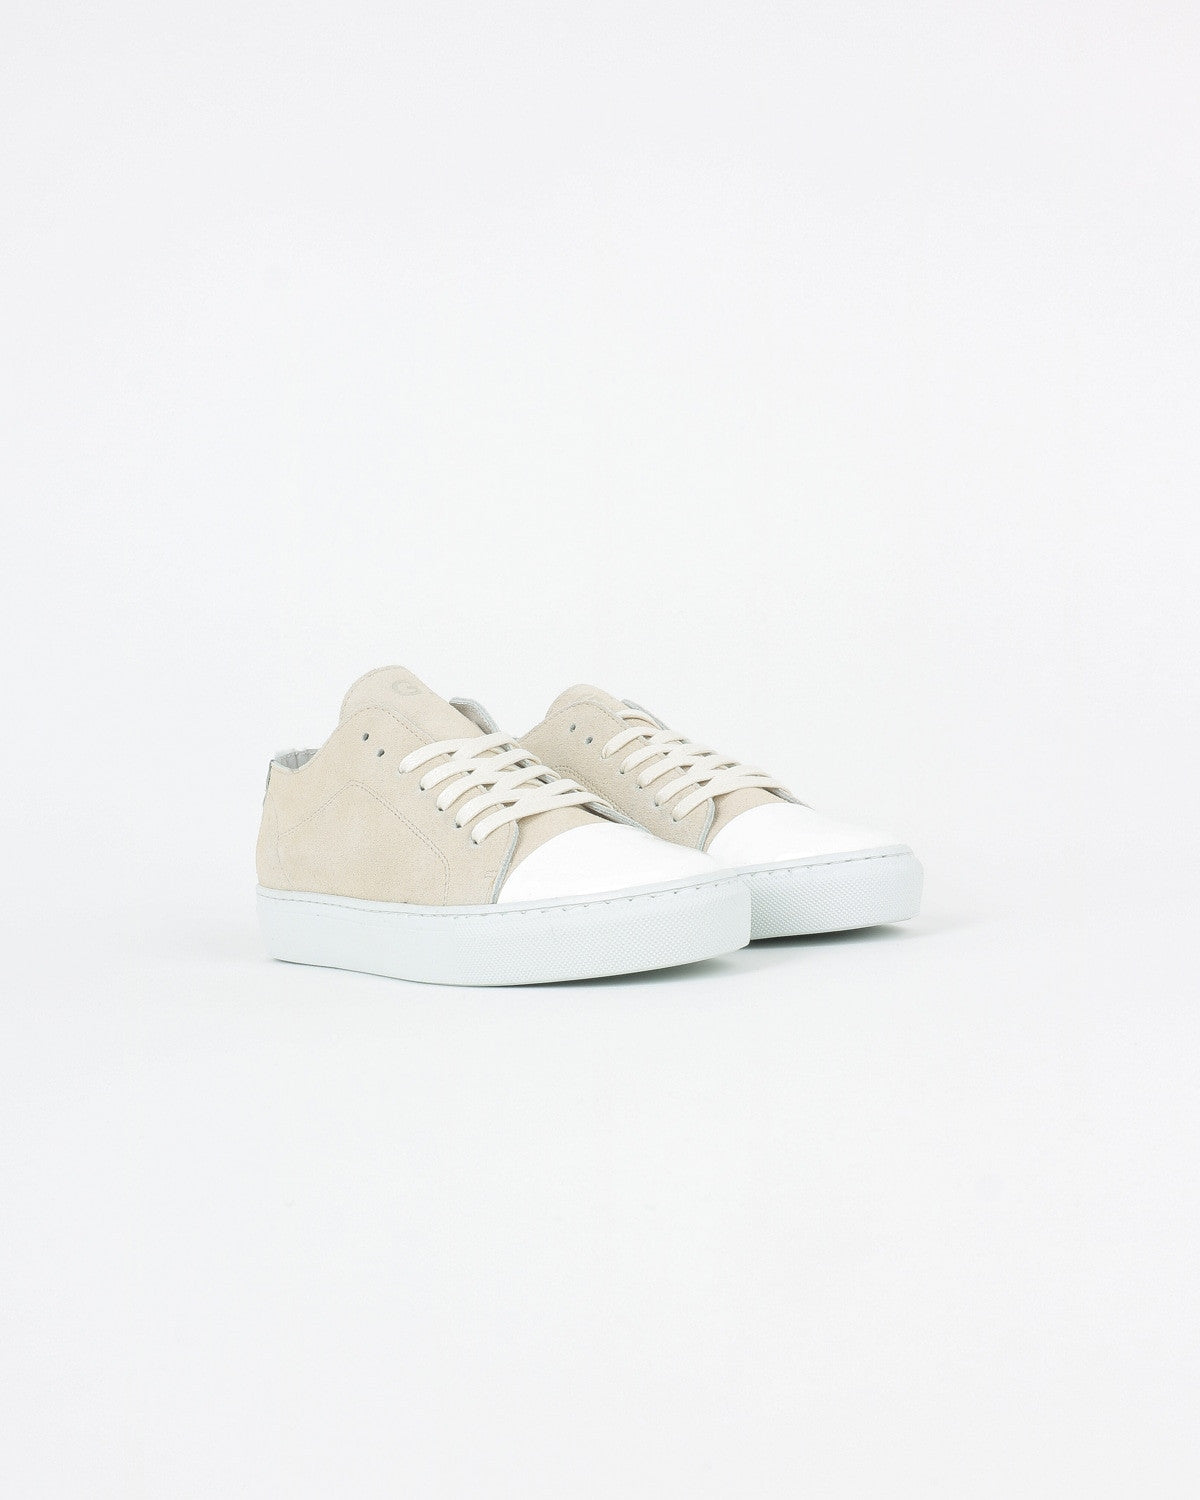 garment project_classic lace sneaker_offwhite suede_view_2_4